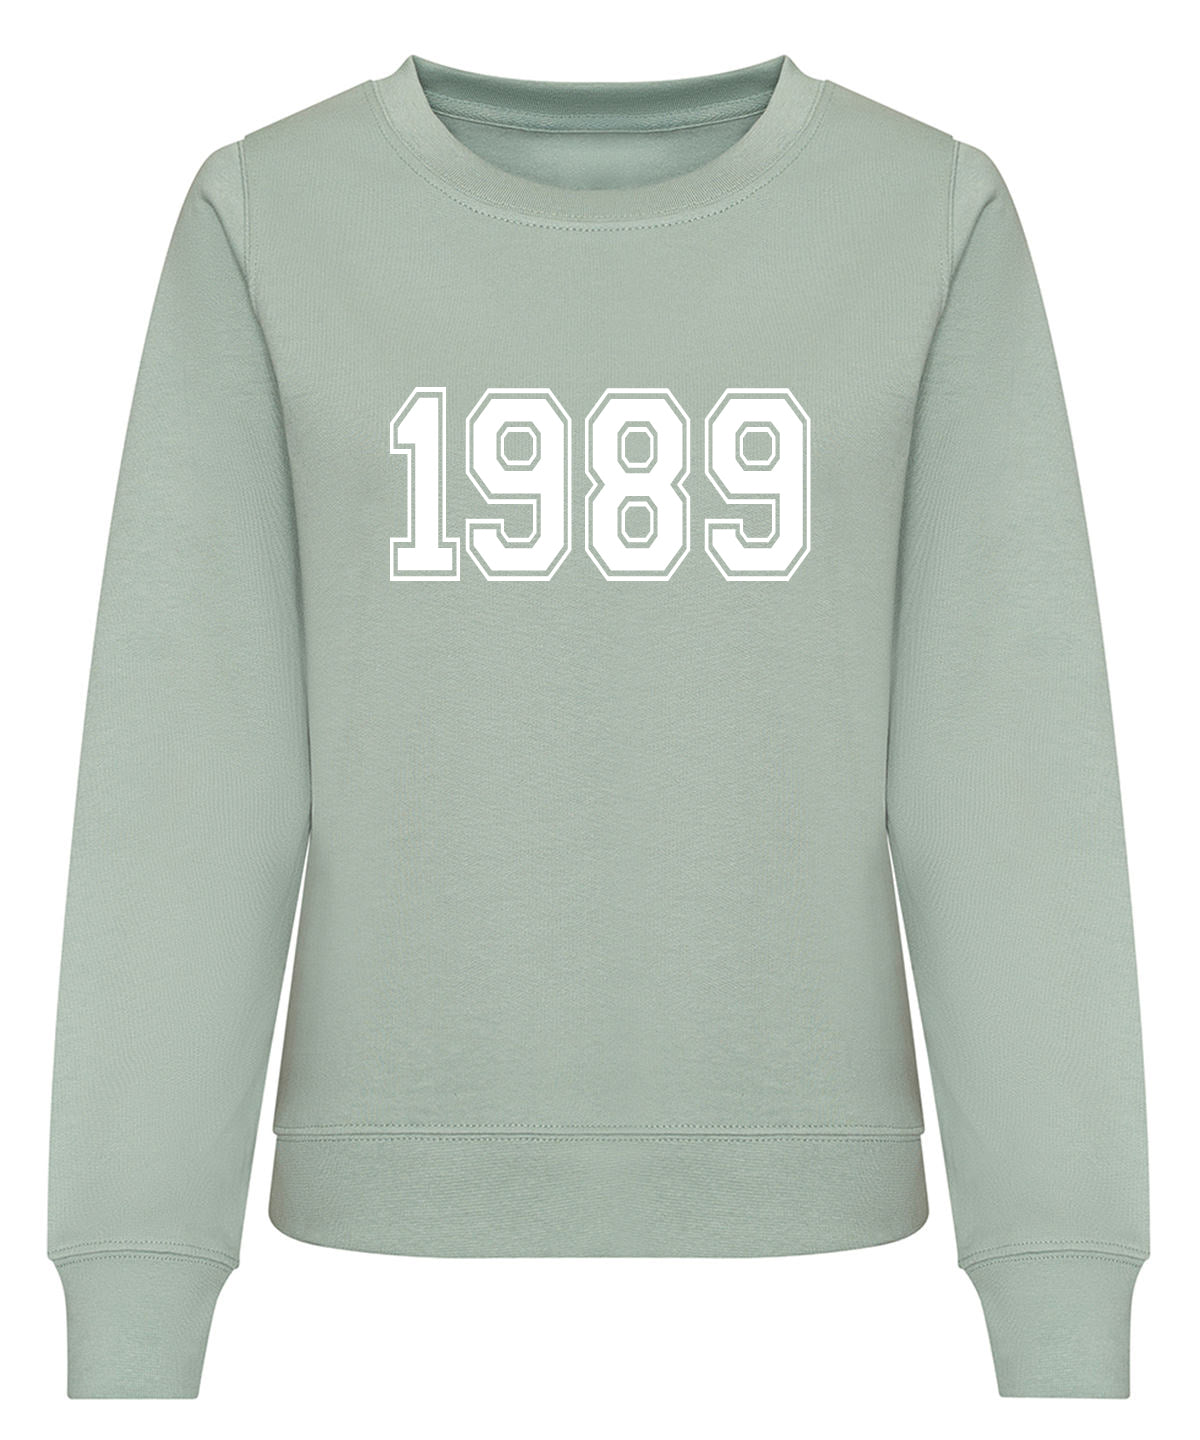 Birth Year 1969 Sweatshirt (you can select your year)